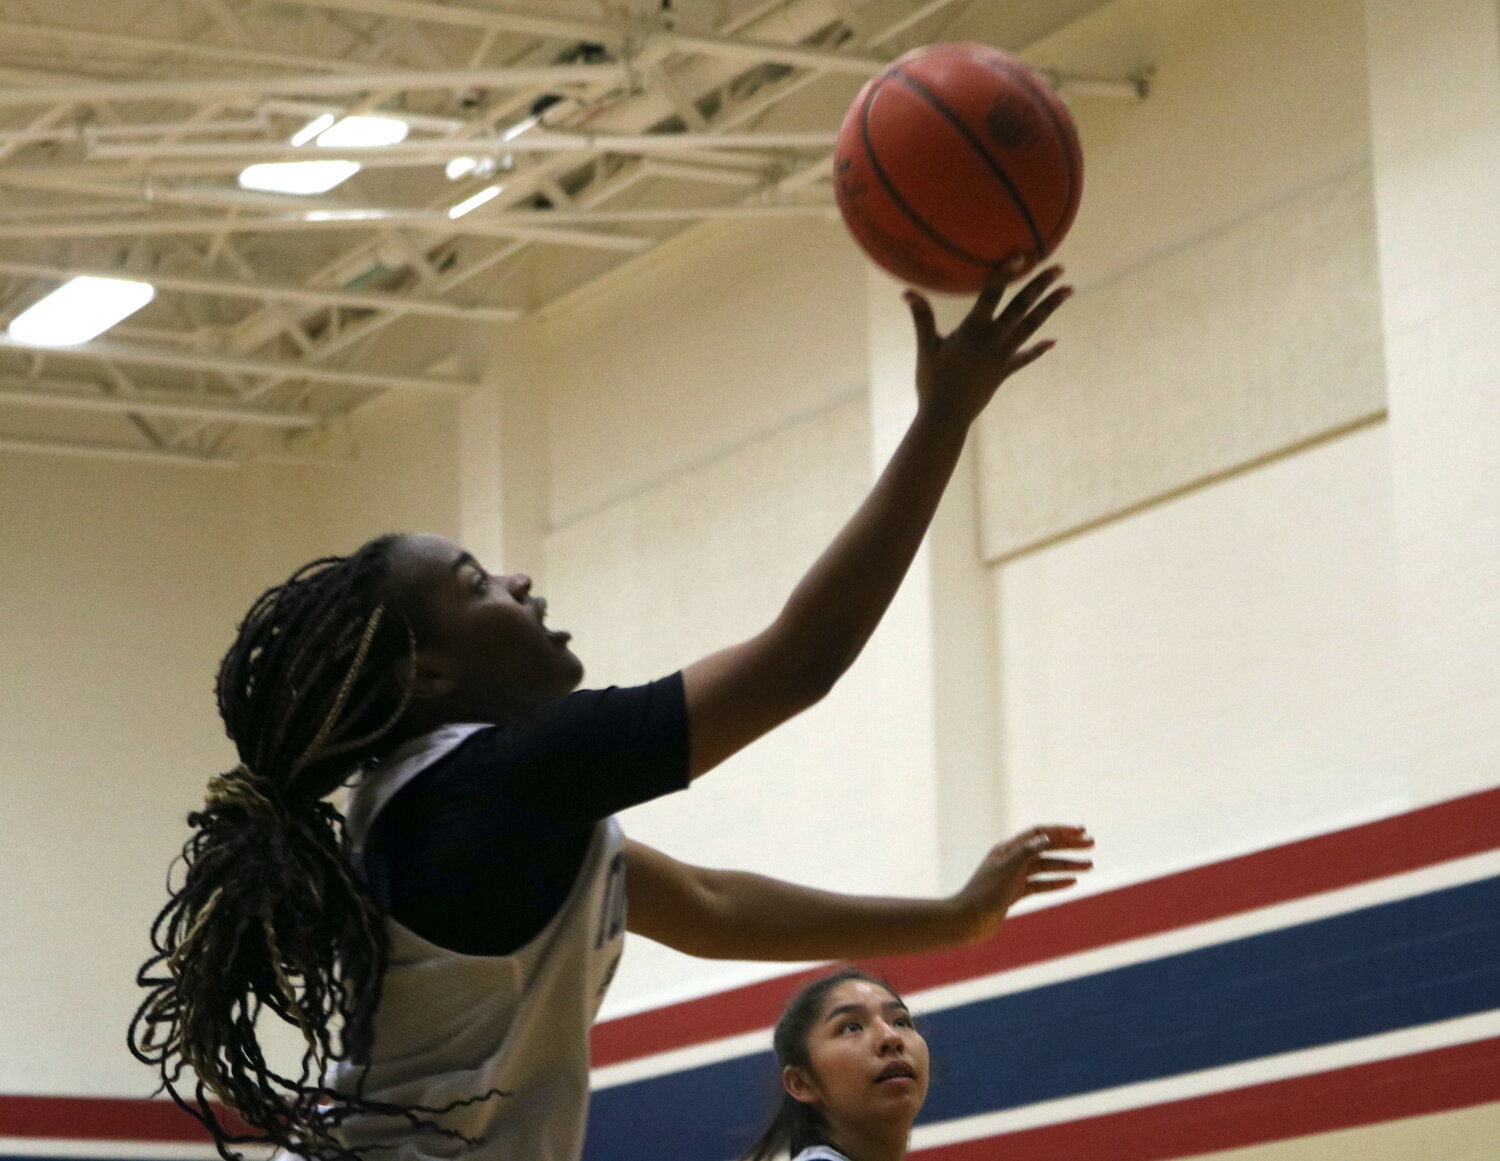 Makayla Tezano shoots a layup during Thursday's game between Tompkins and Laredo United South defenders at the Tompkins gym.